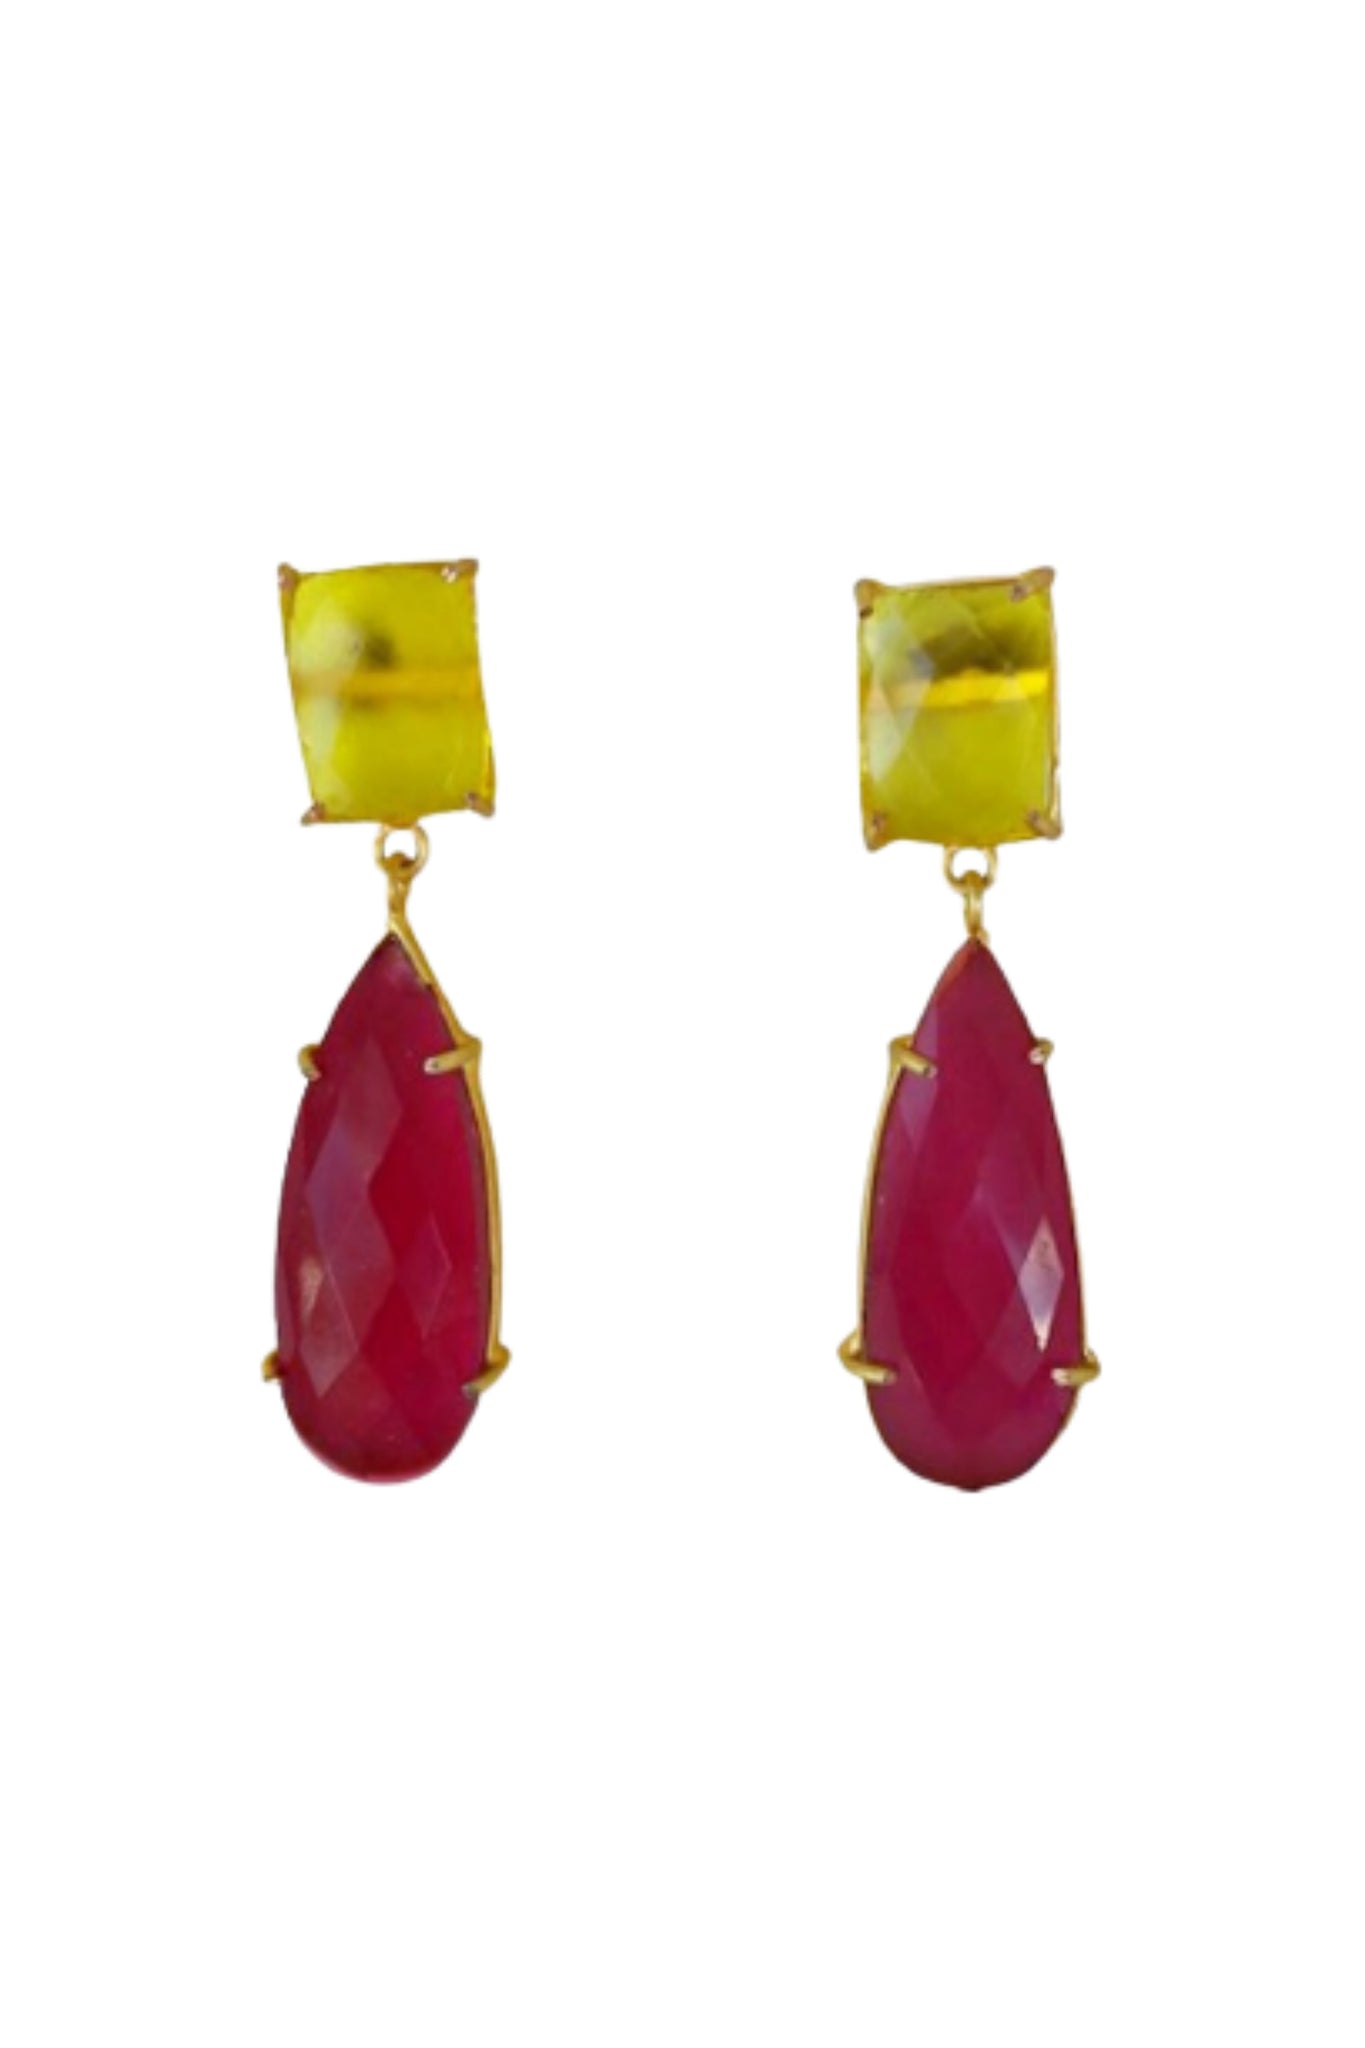 Charlotte Earring - Citrus and Pink